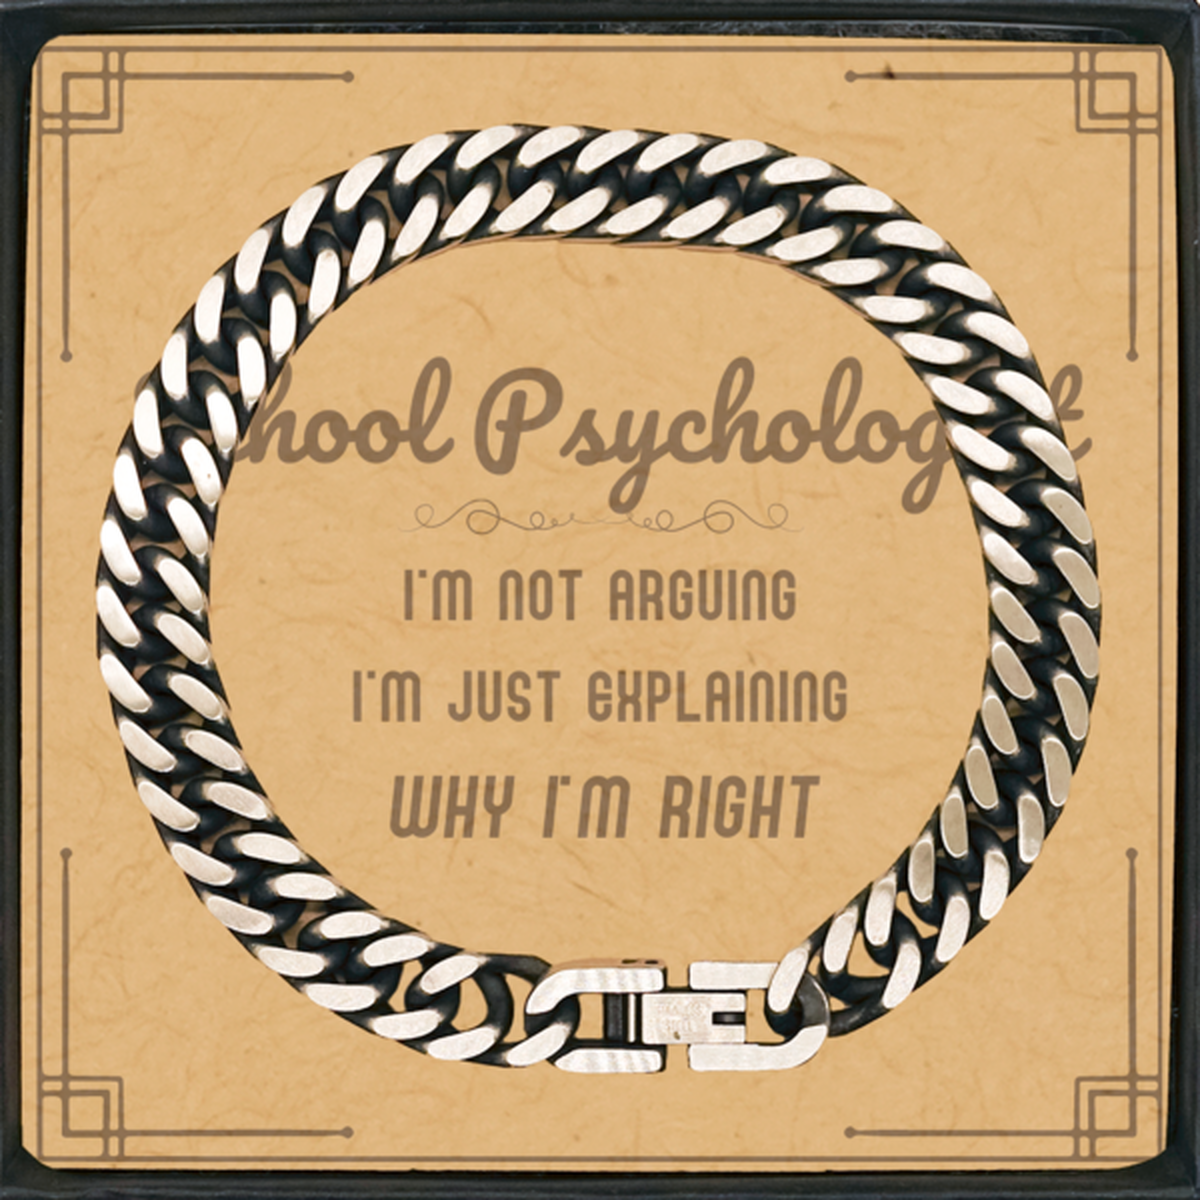 School Psychologist I'm not Arguing. I'm Just Explaining Why I'm RIGHT Cuban Link Chain Bracelet, Funny Saying Quote School Psychologist Gifts For School Psychologist Message Card Graduation Birthday Christmas Gifts for Men Women Coworker